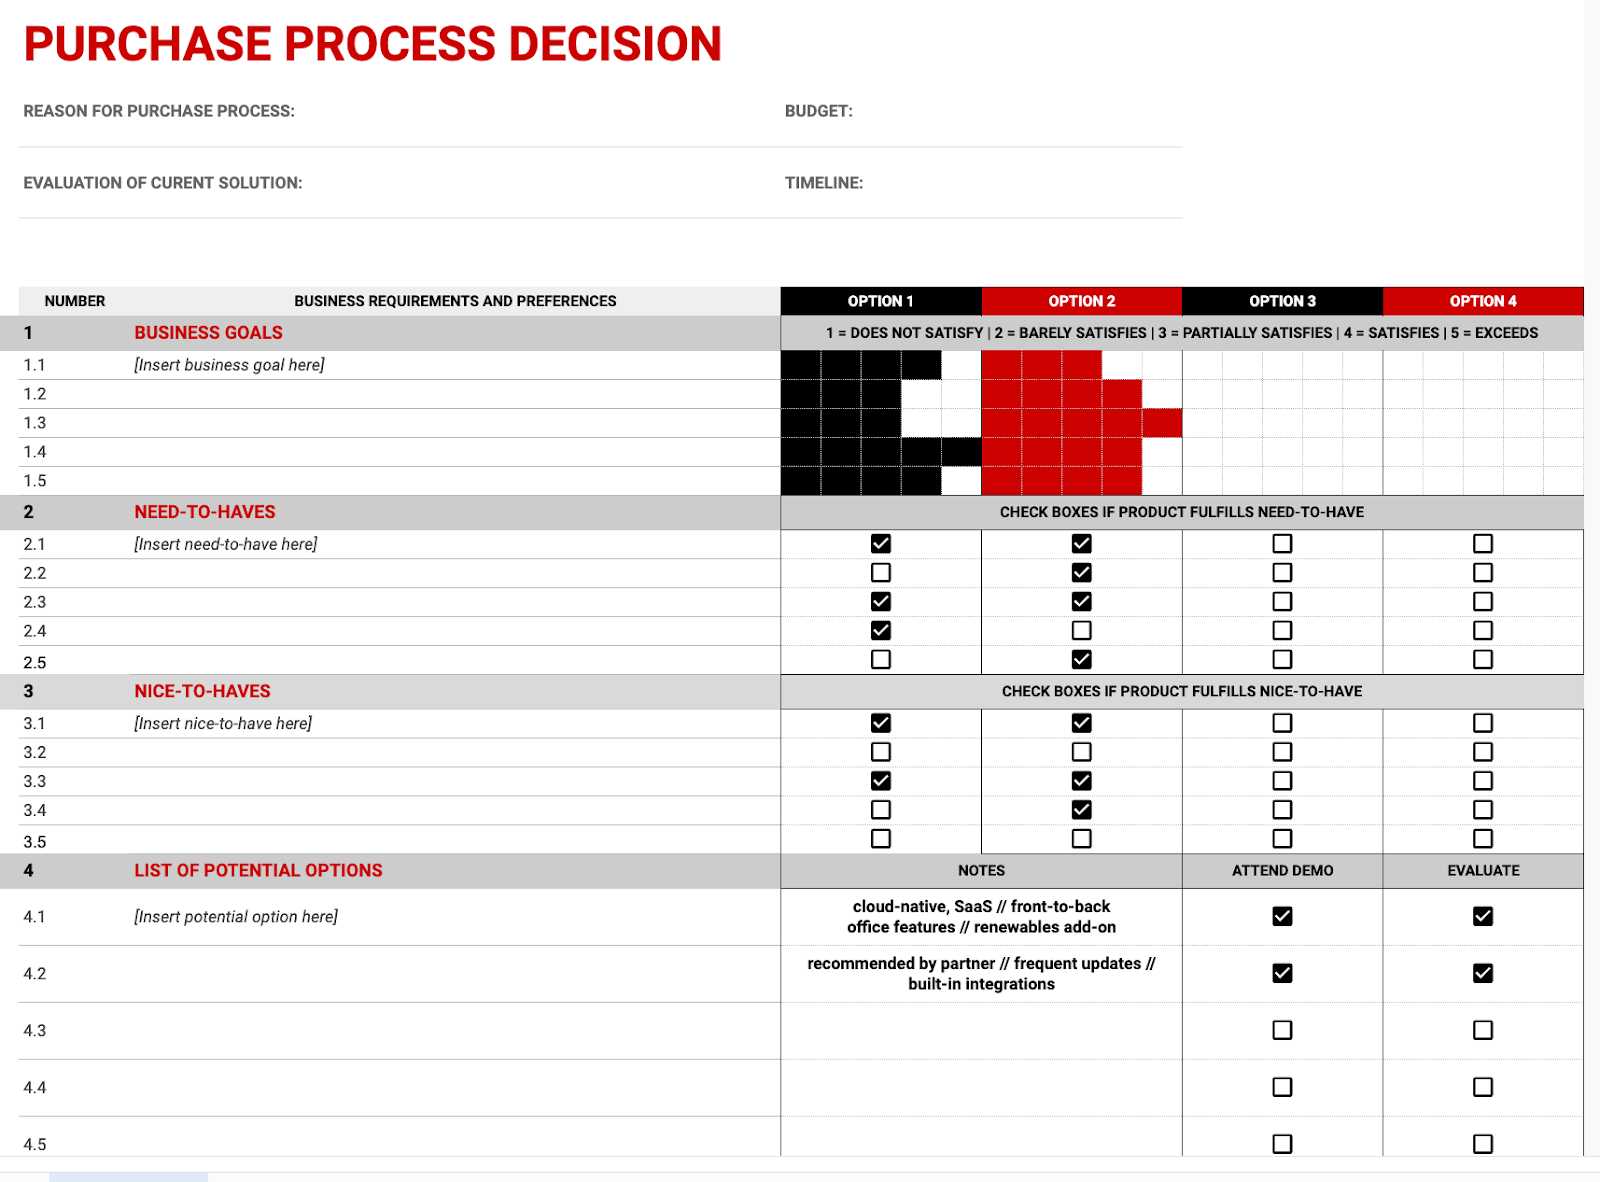 Molecule's free ETRM software purchase process template. 